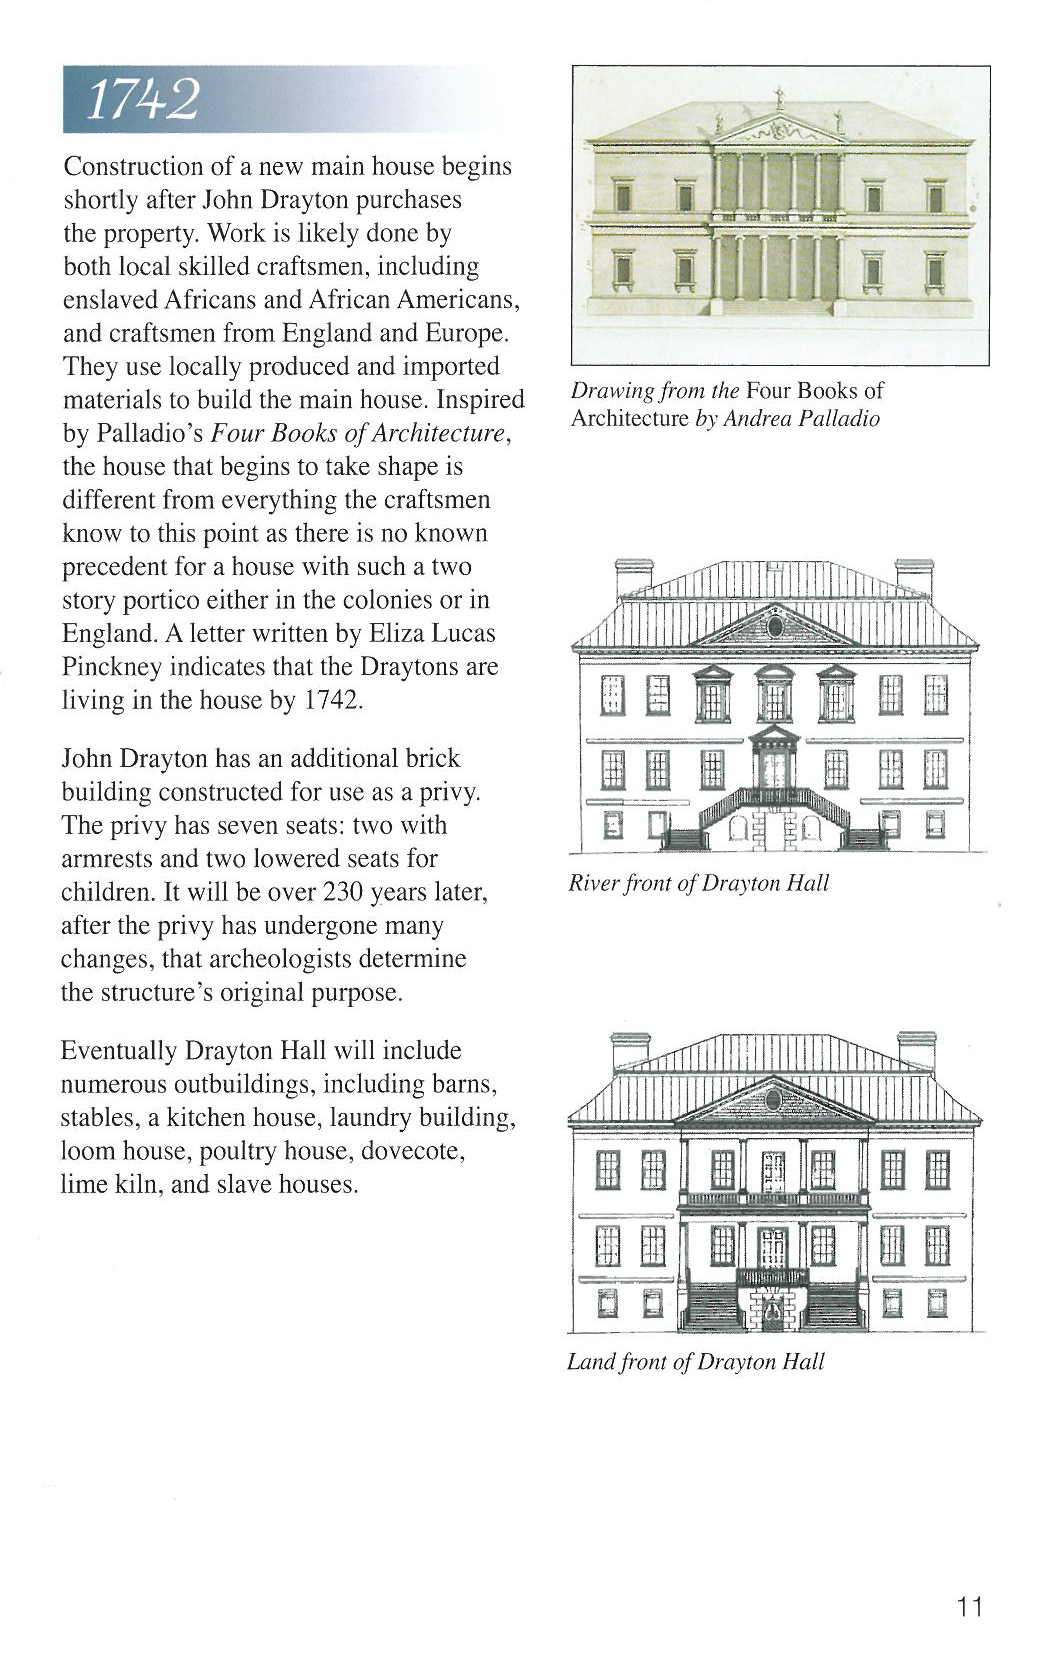 Palladian Inspiration. Image courtesy of Drayton Hall & The National Trust for Historic Preservation.